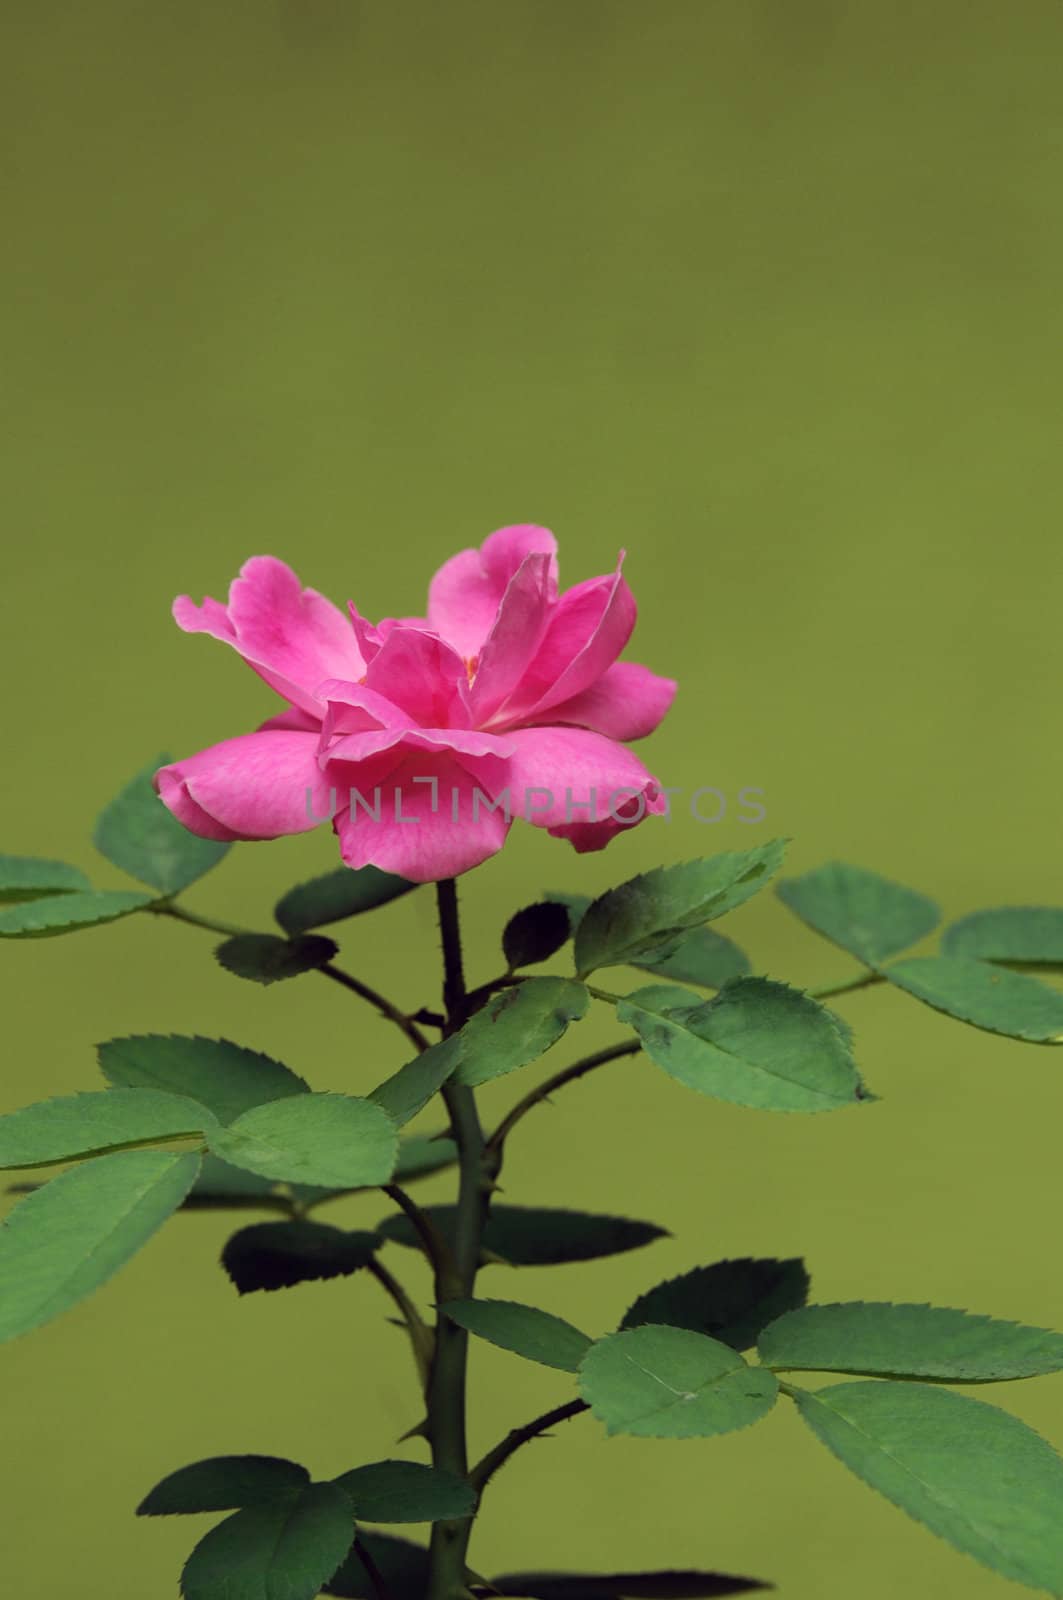 A beautiful pink rose on green natural background